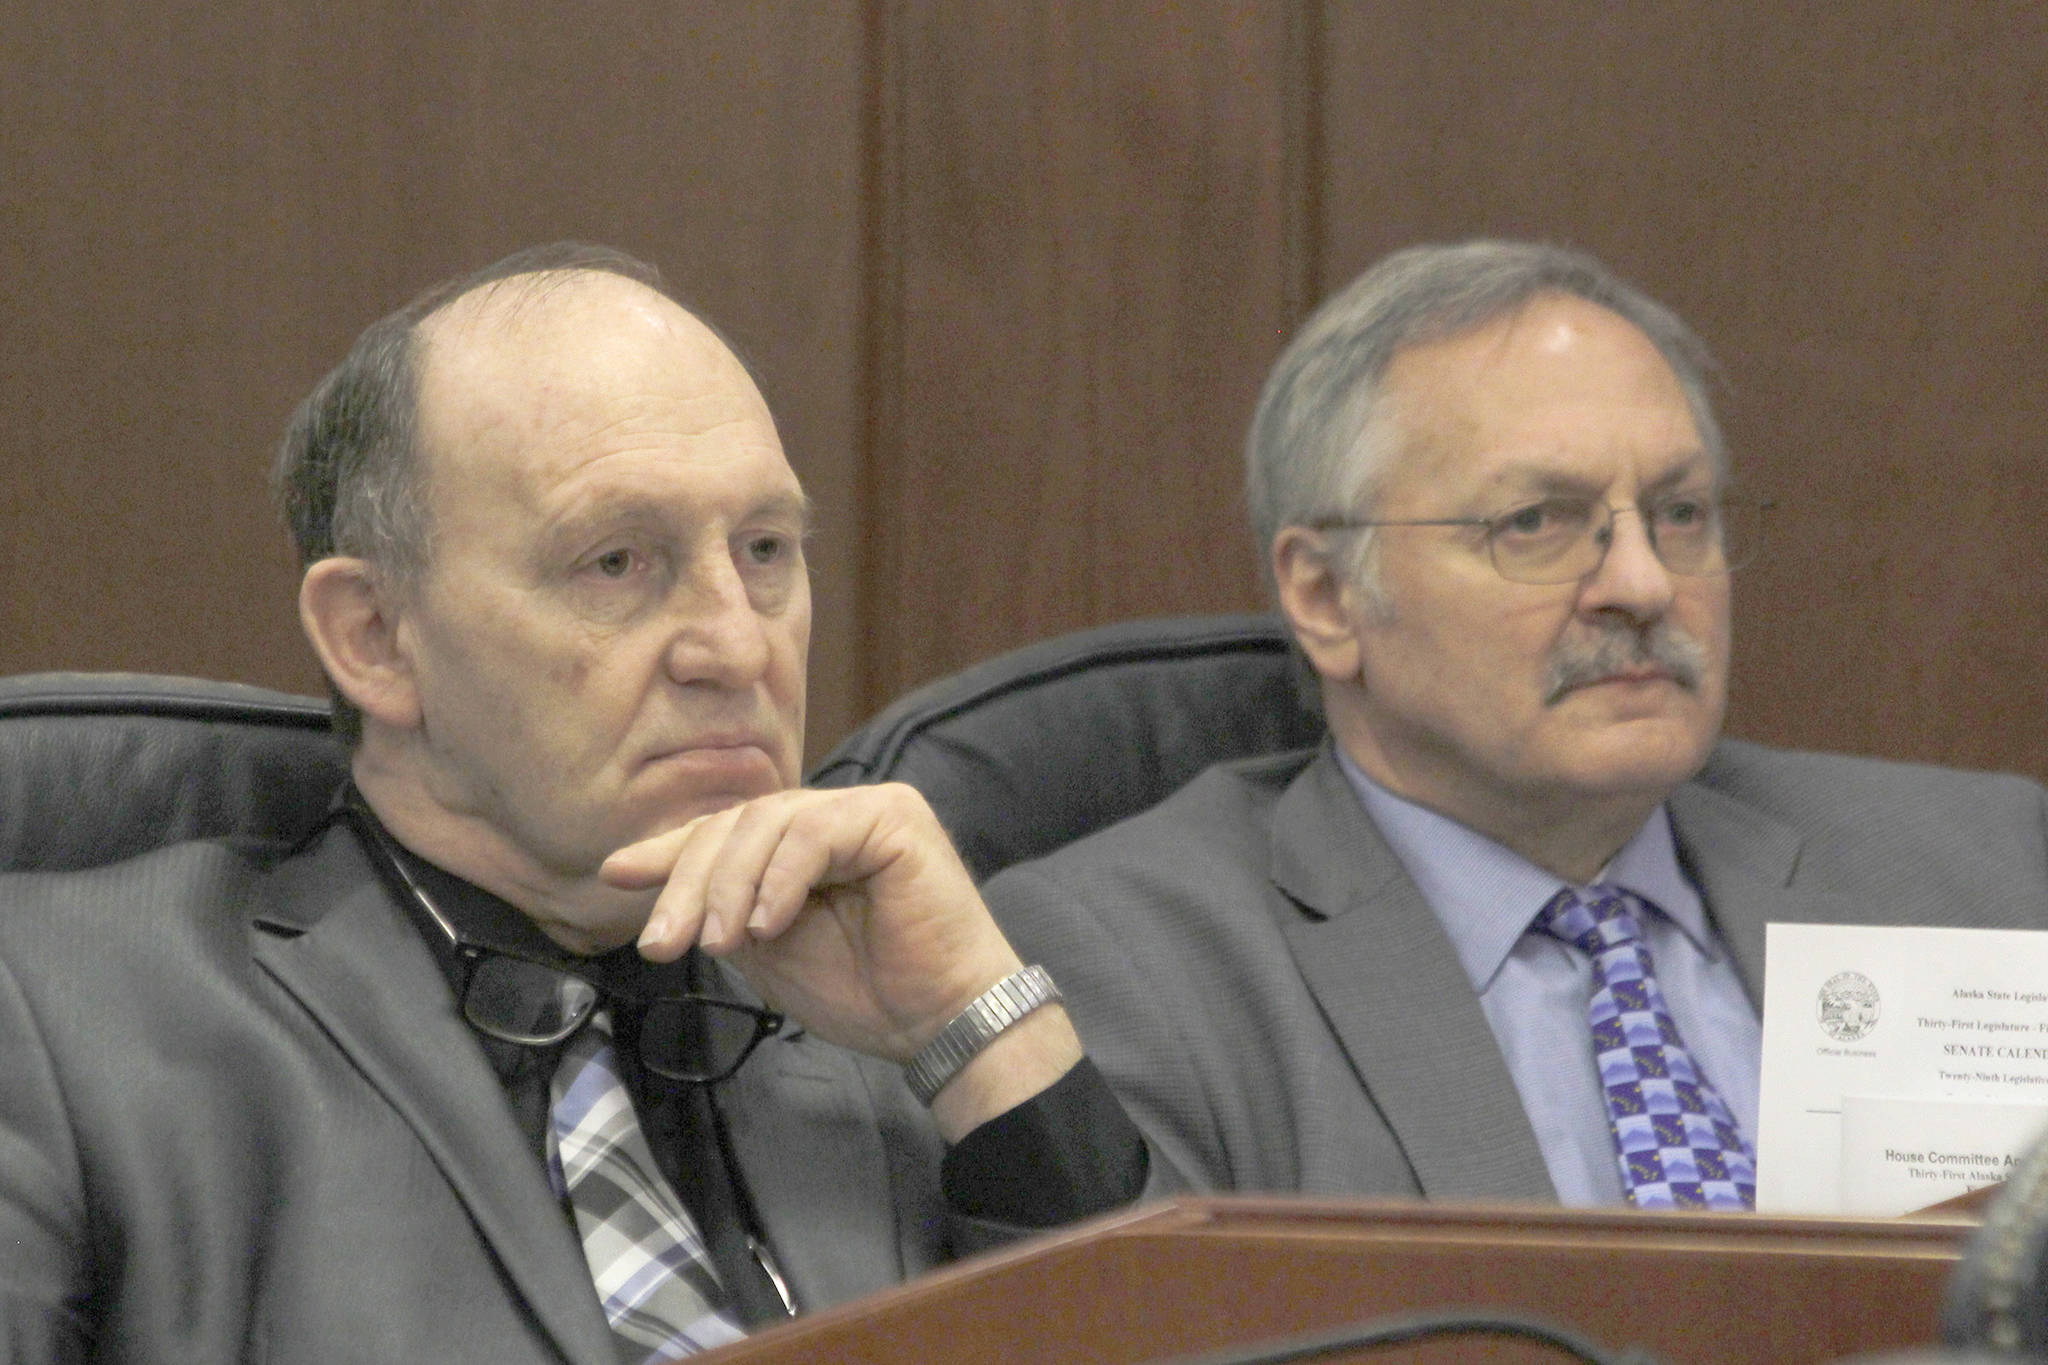 Rep. Gary Knopp, R-Kenai/Soldotna, and Rep. Dave Talerico, R-Healy, sit next to each other after Knopp voted not to confirm Talerico as Speaker of the House on Feb. 5. (Alex McCarthy | Juneau Empire)